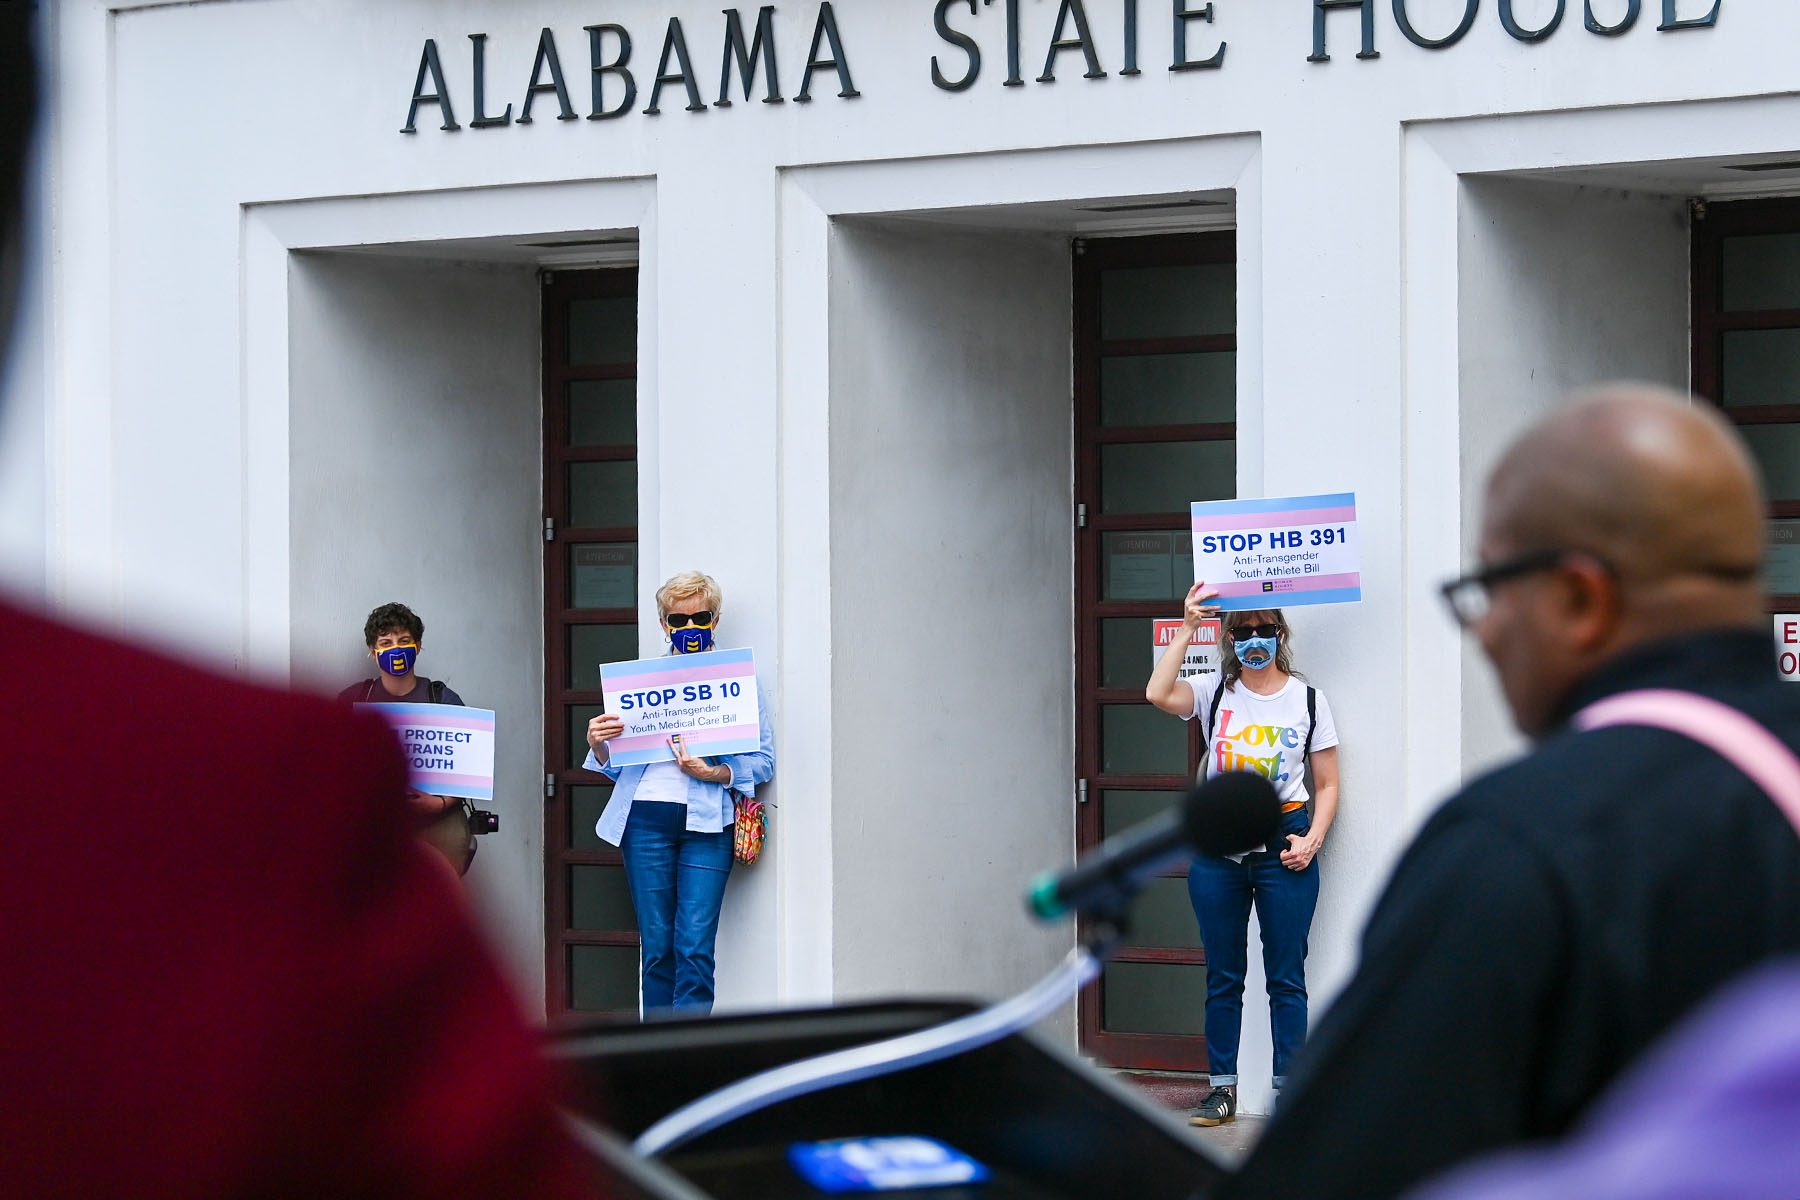 Several people hold up signs that read "STOP HB 391 Anti-Transgender Youth Athlete Bill," and "STOP SB 10 Anti-transgender Youth Medical Care Bill" during a rally in front of the Alabama State House. A person is seen making a speech at a podium in the foreground.